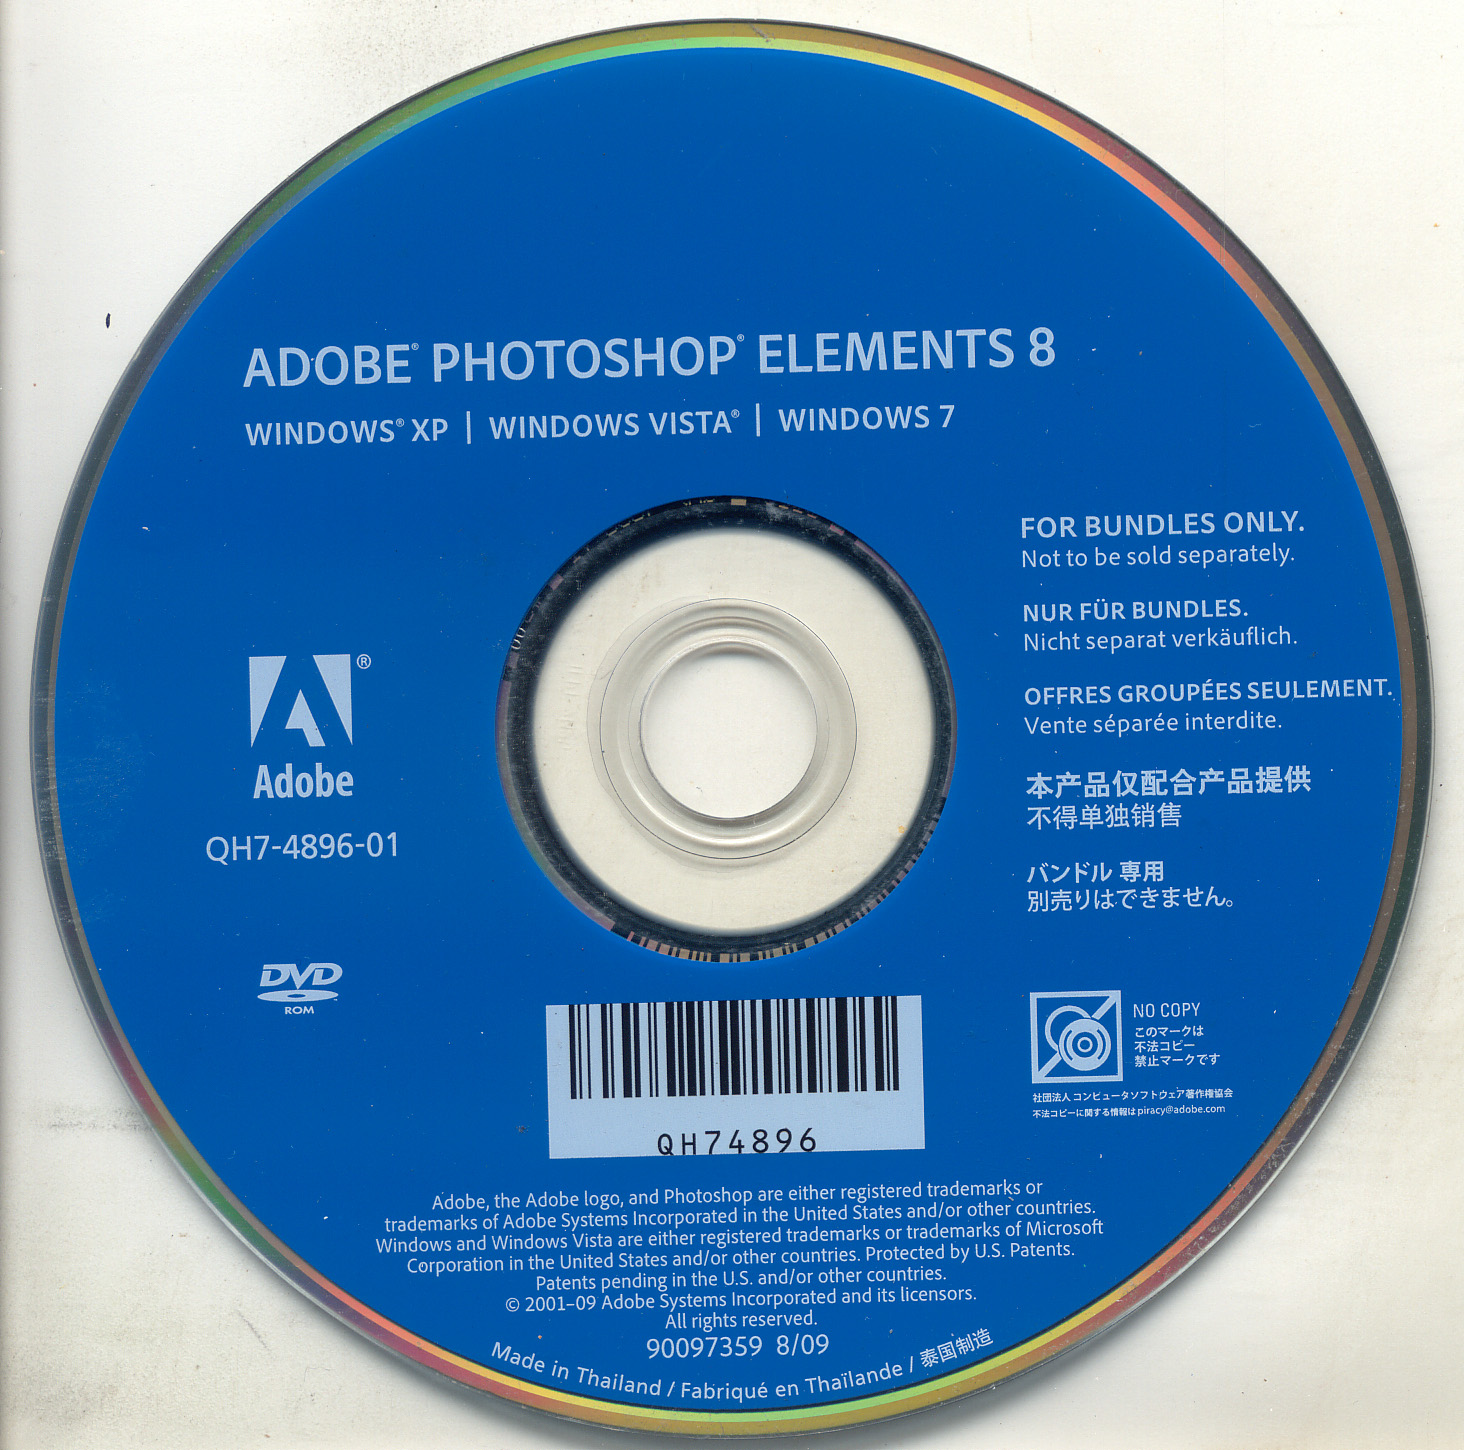 Adobe photoshop elements free download windows xp free sound effects software download